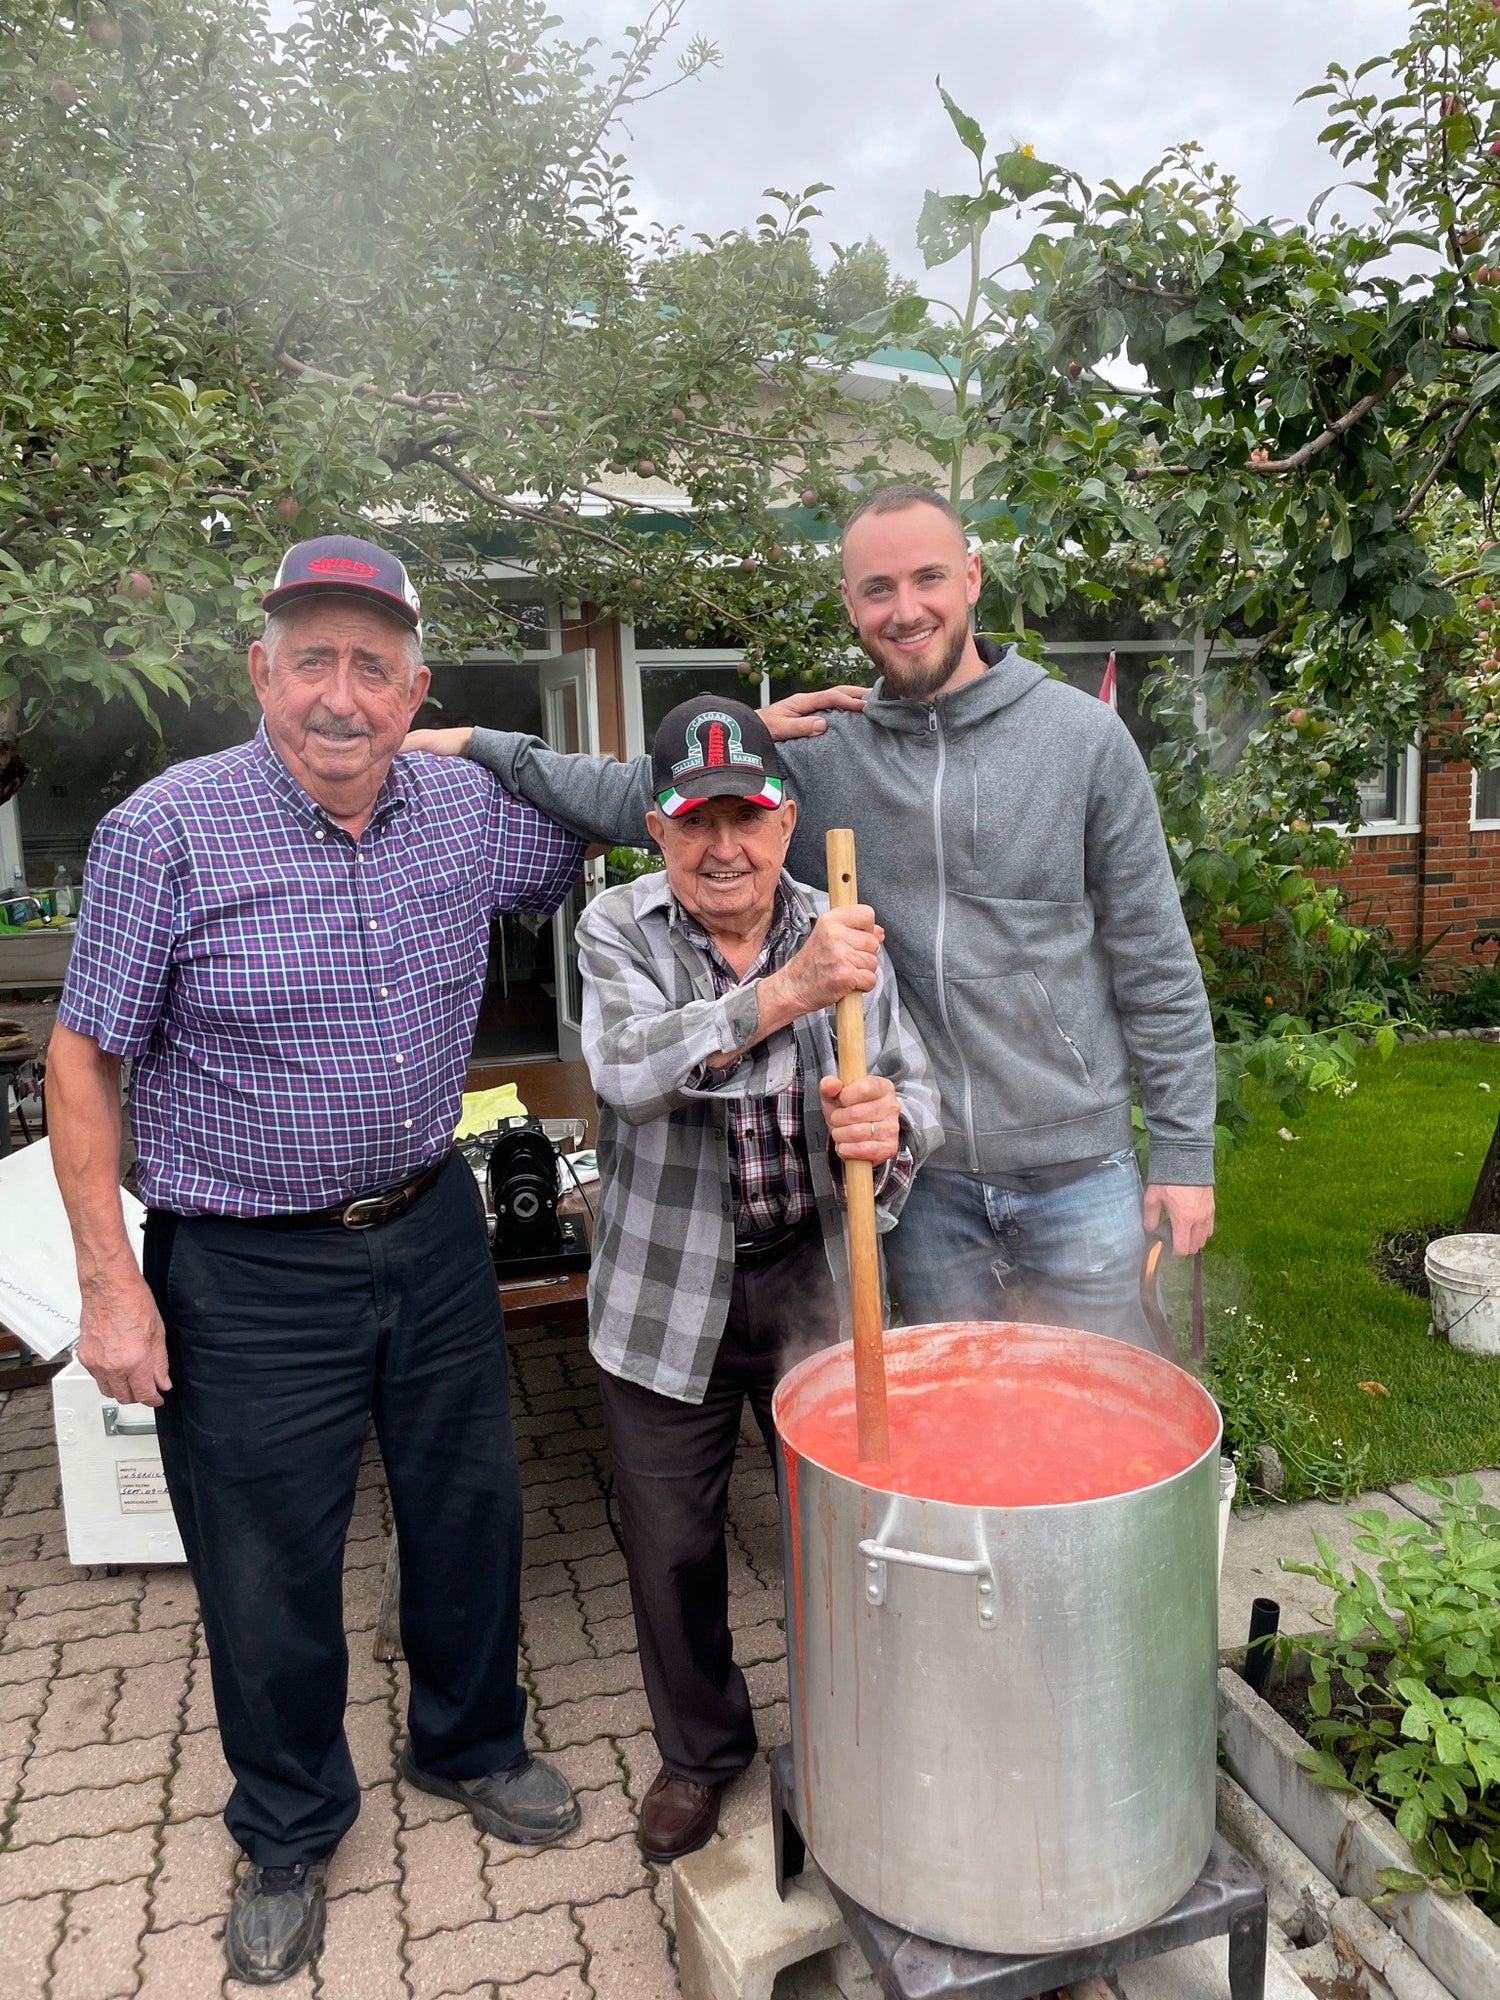 Matt Cusano Ciao Chili founder pictured with grandpa and uncle making a large batch of Italian sauce 